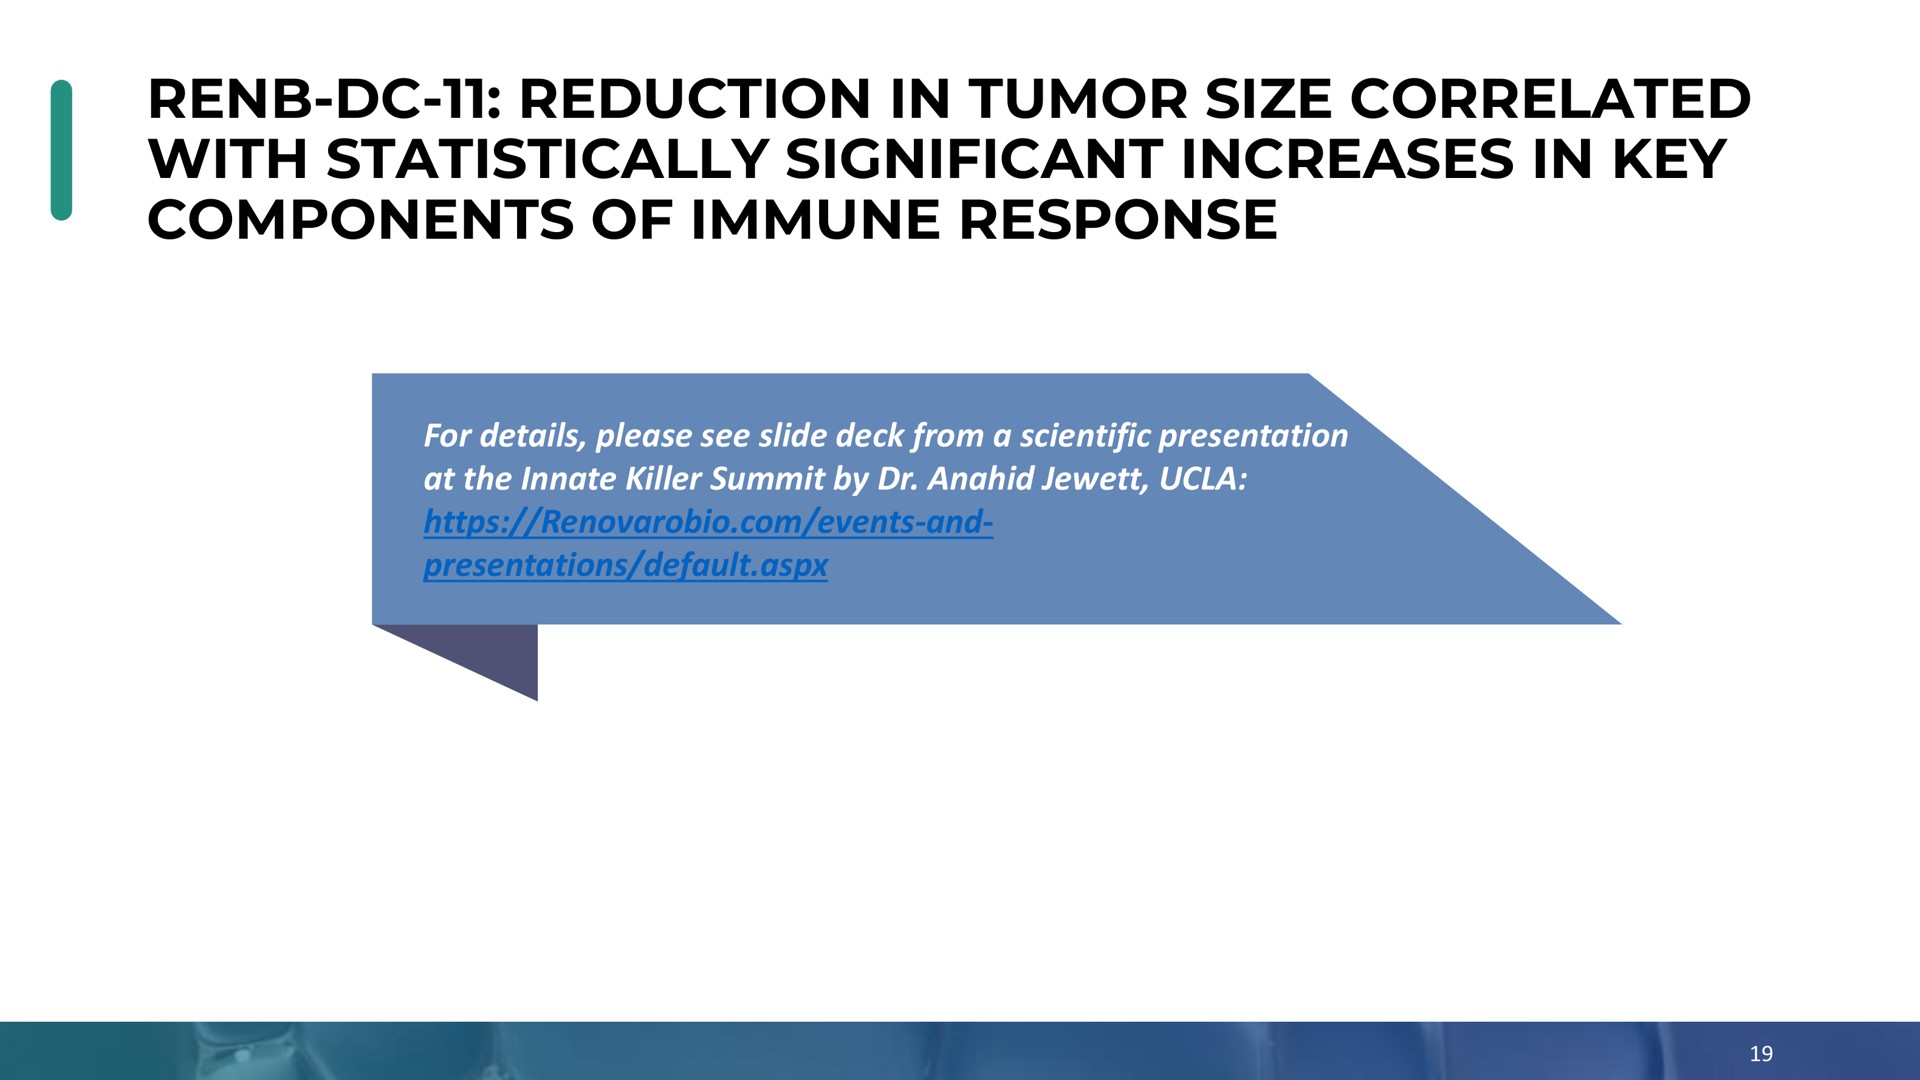 reduction in tumor size correlated with statistically significant increases in key components of immune response | Enochian Biosciences